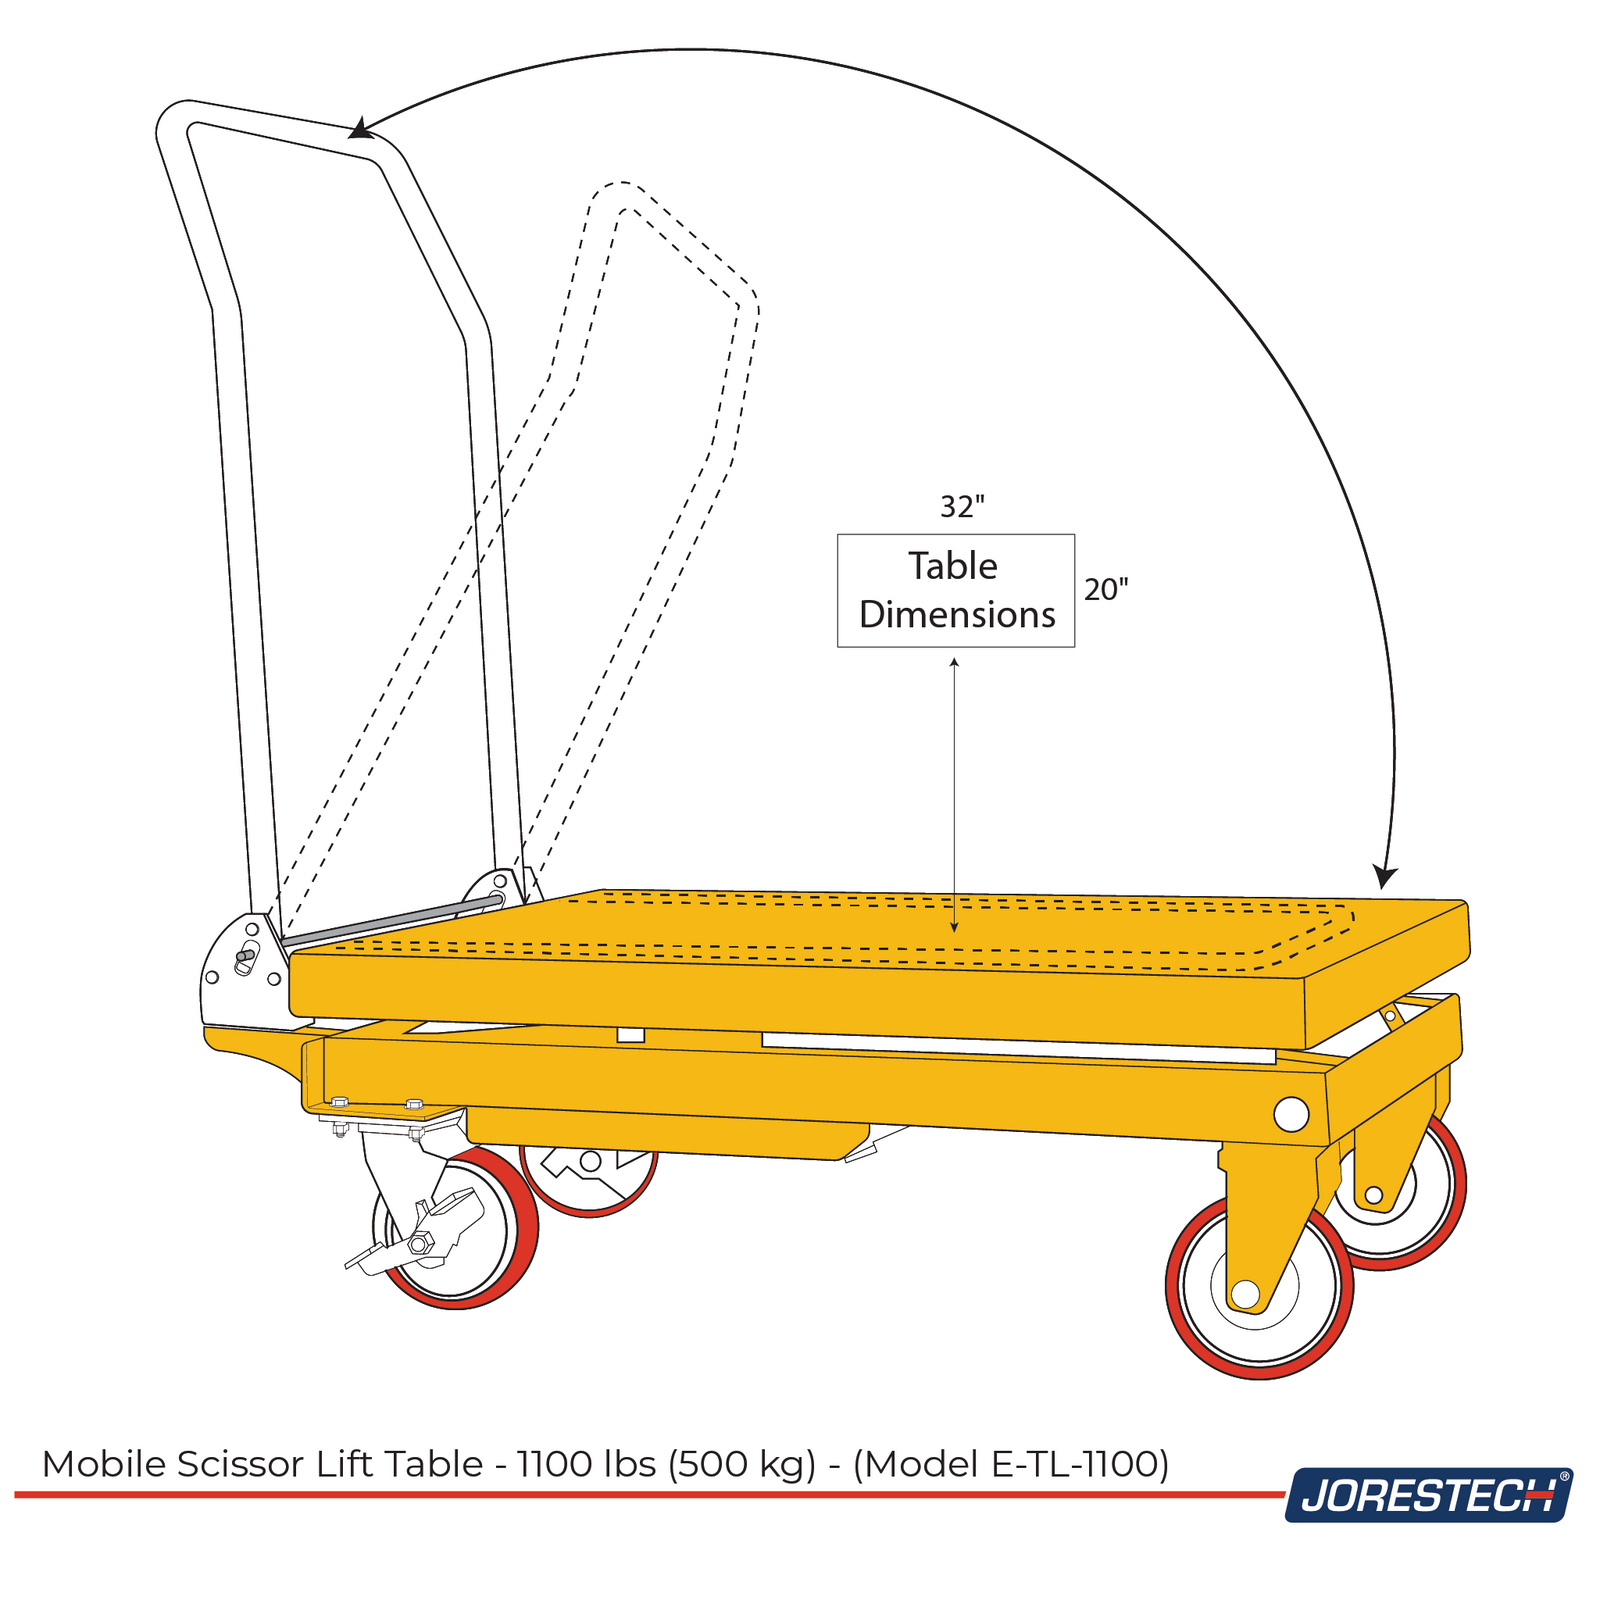  Dimensions of the mobile scissor lift table for 110 lbs: 32 inches L by 20 inches W.